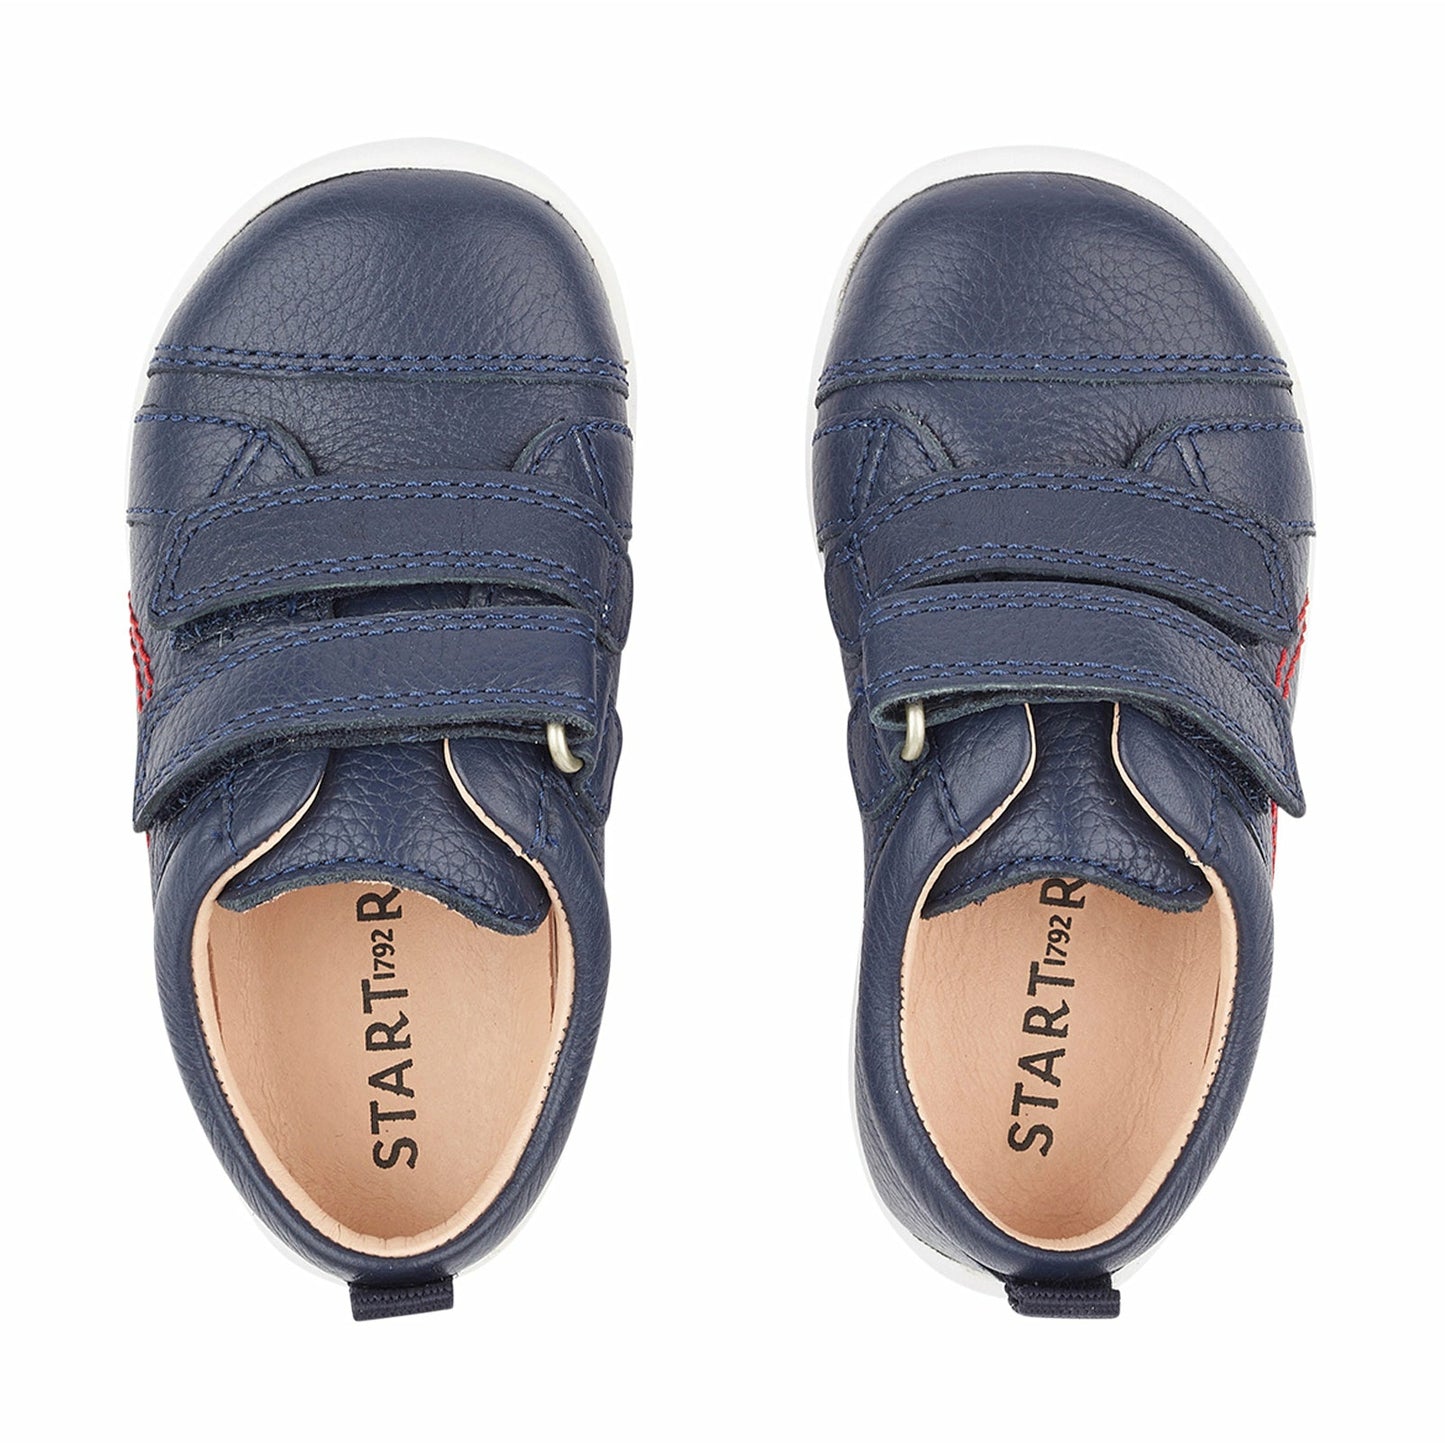 A pair of boys casual shoes by Start Rite,style Tree House, in Navy leather with double velcro fastening. Top view.